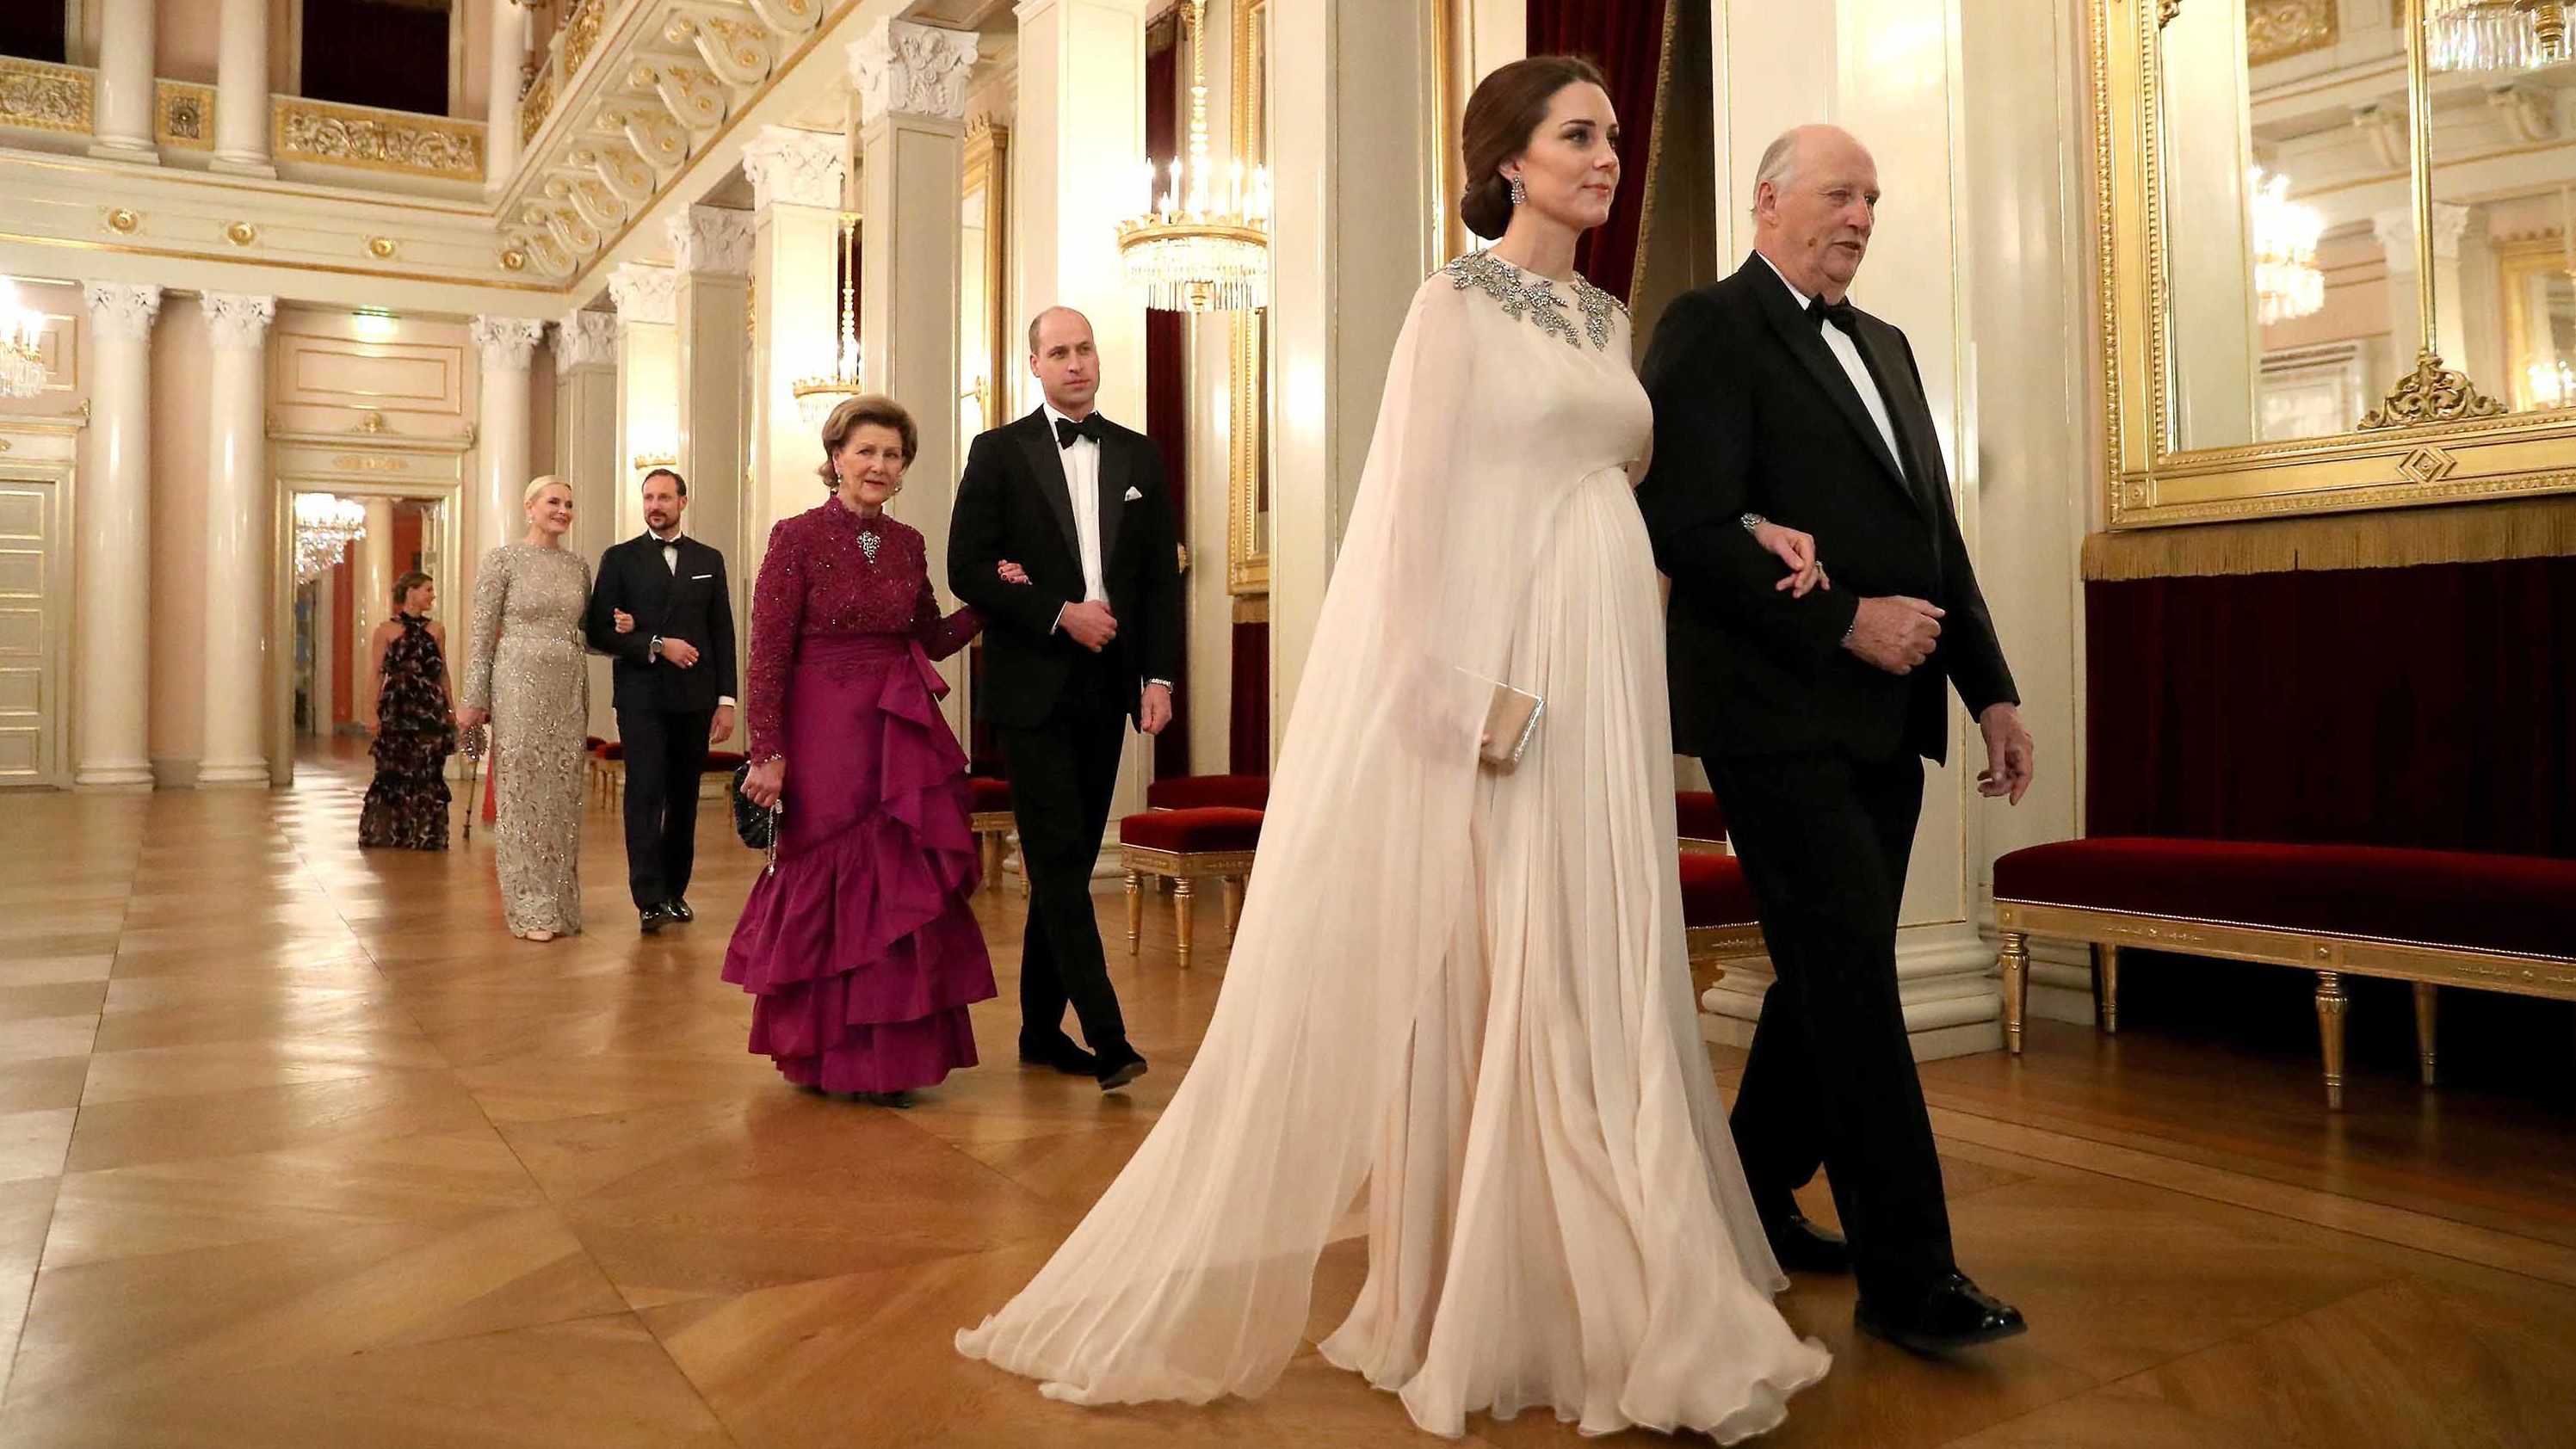 Catherine is escorted to dinner by Norwegian King Harald V during a visit to Norway in February 2018. William is escorted by Norway's Queen Sonja.